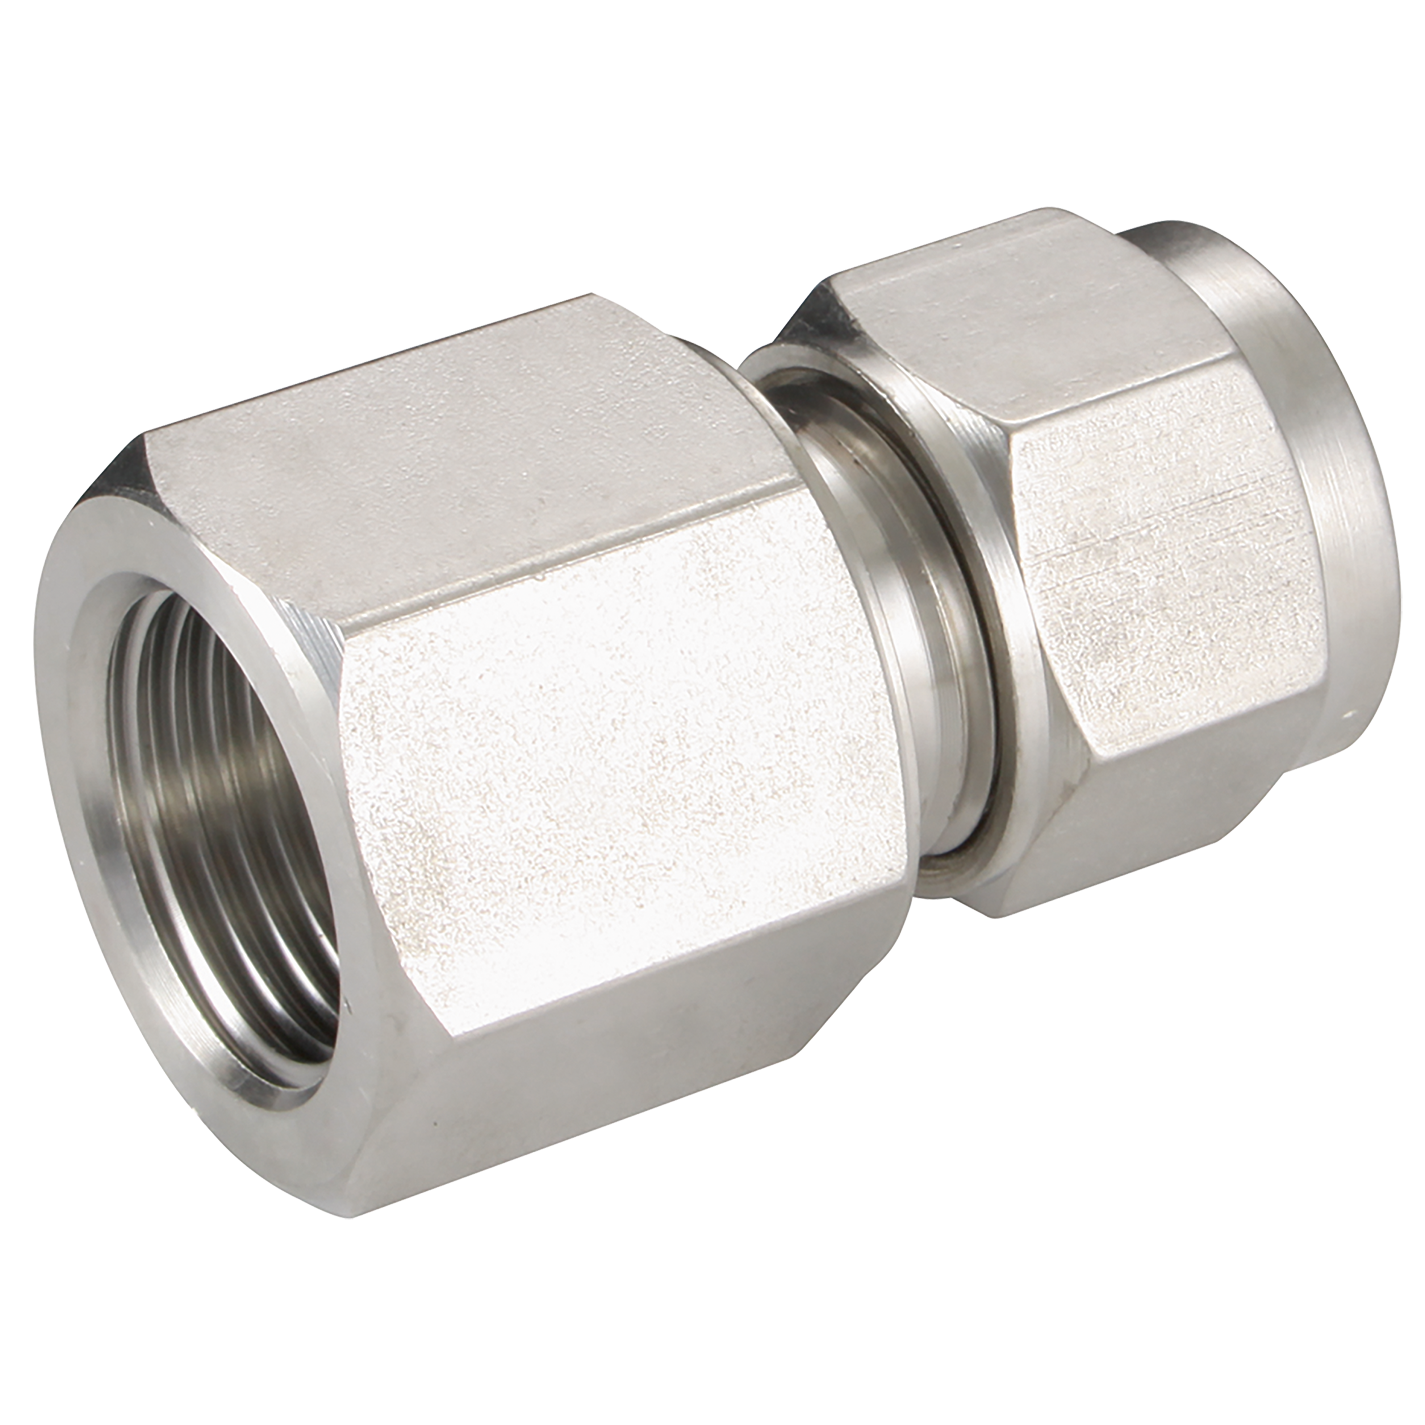 FEMALE CONNECTOR 6 OD 1/2 BSPP